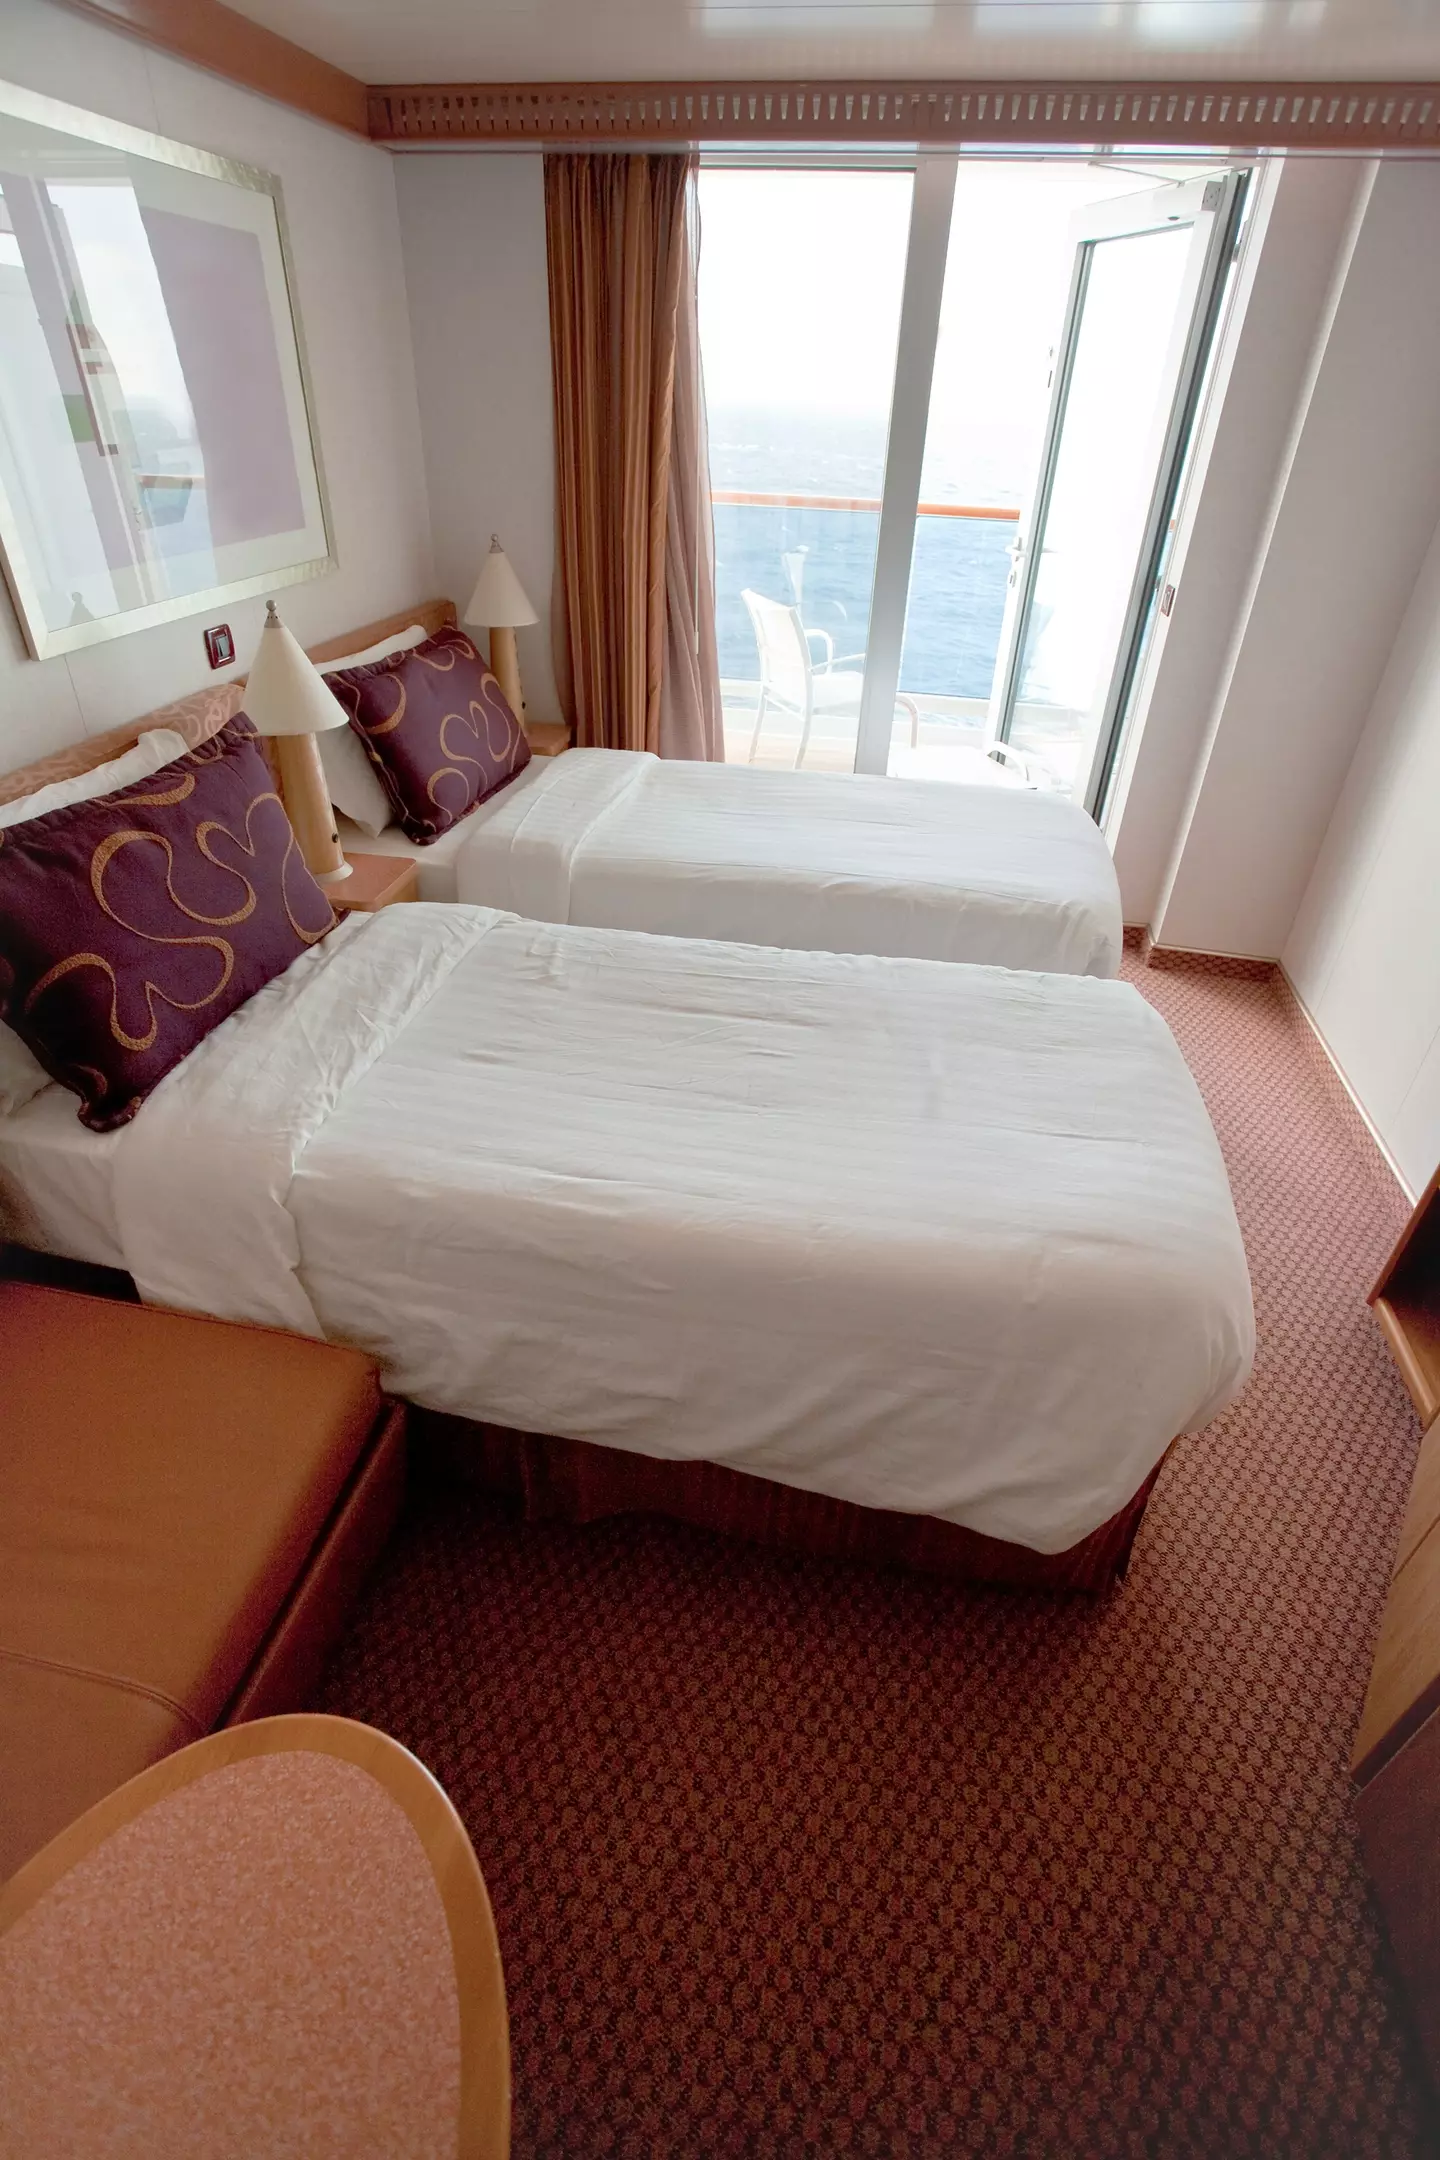 A cruise ship cabin (Getty Stock Images)